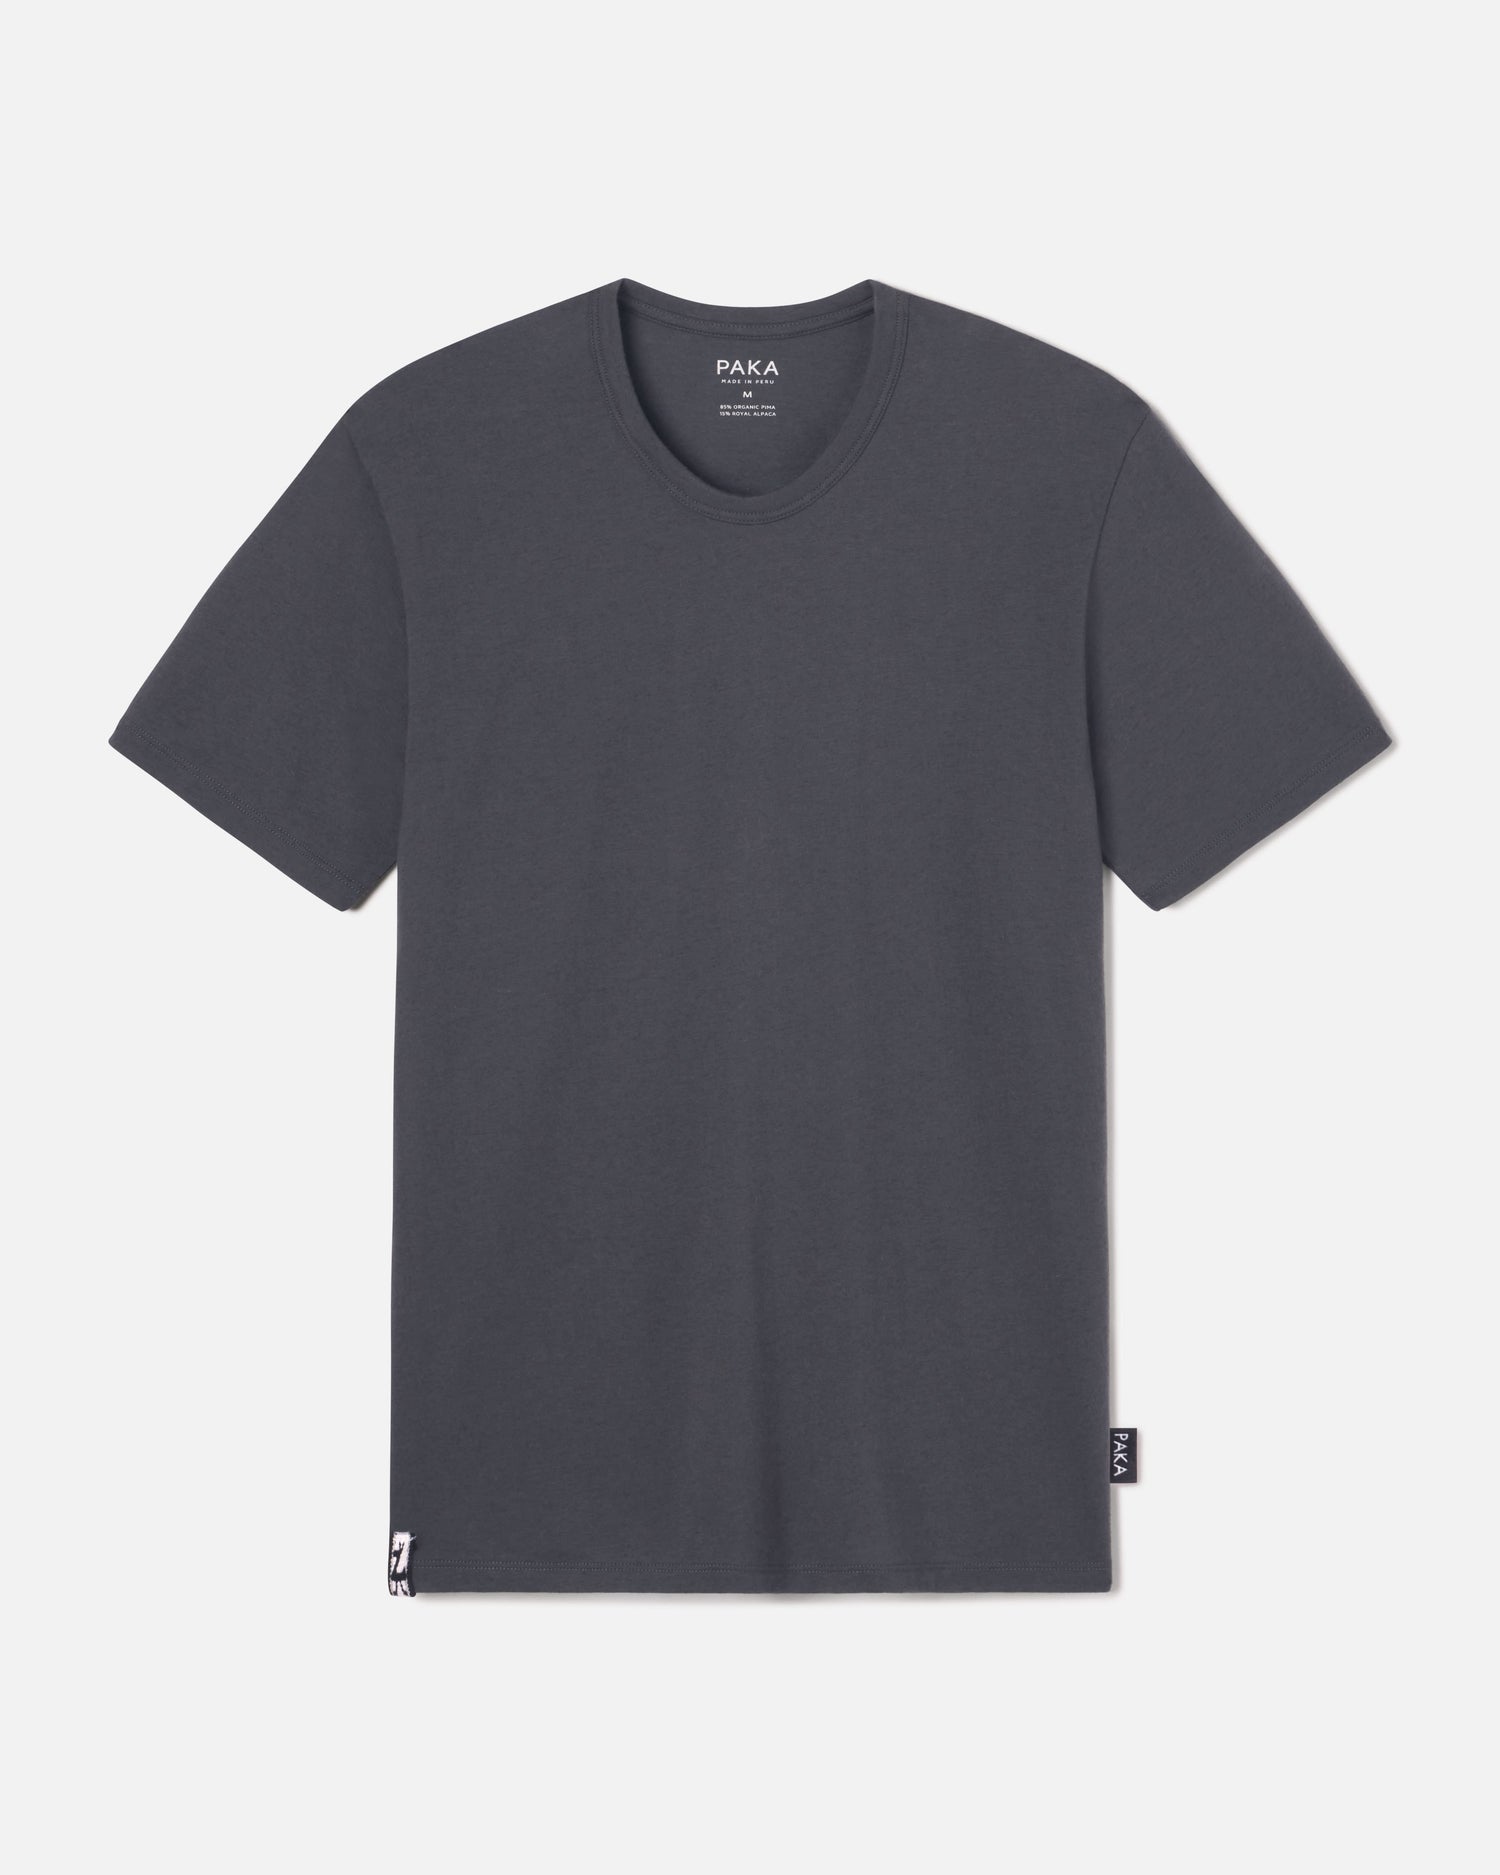 New York Times 1619 Men's Shirt – The New York Times Store